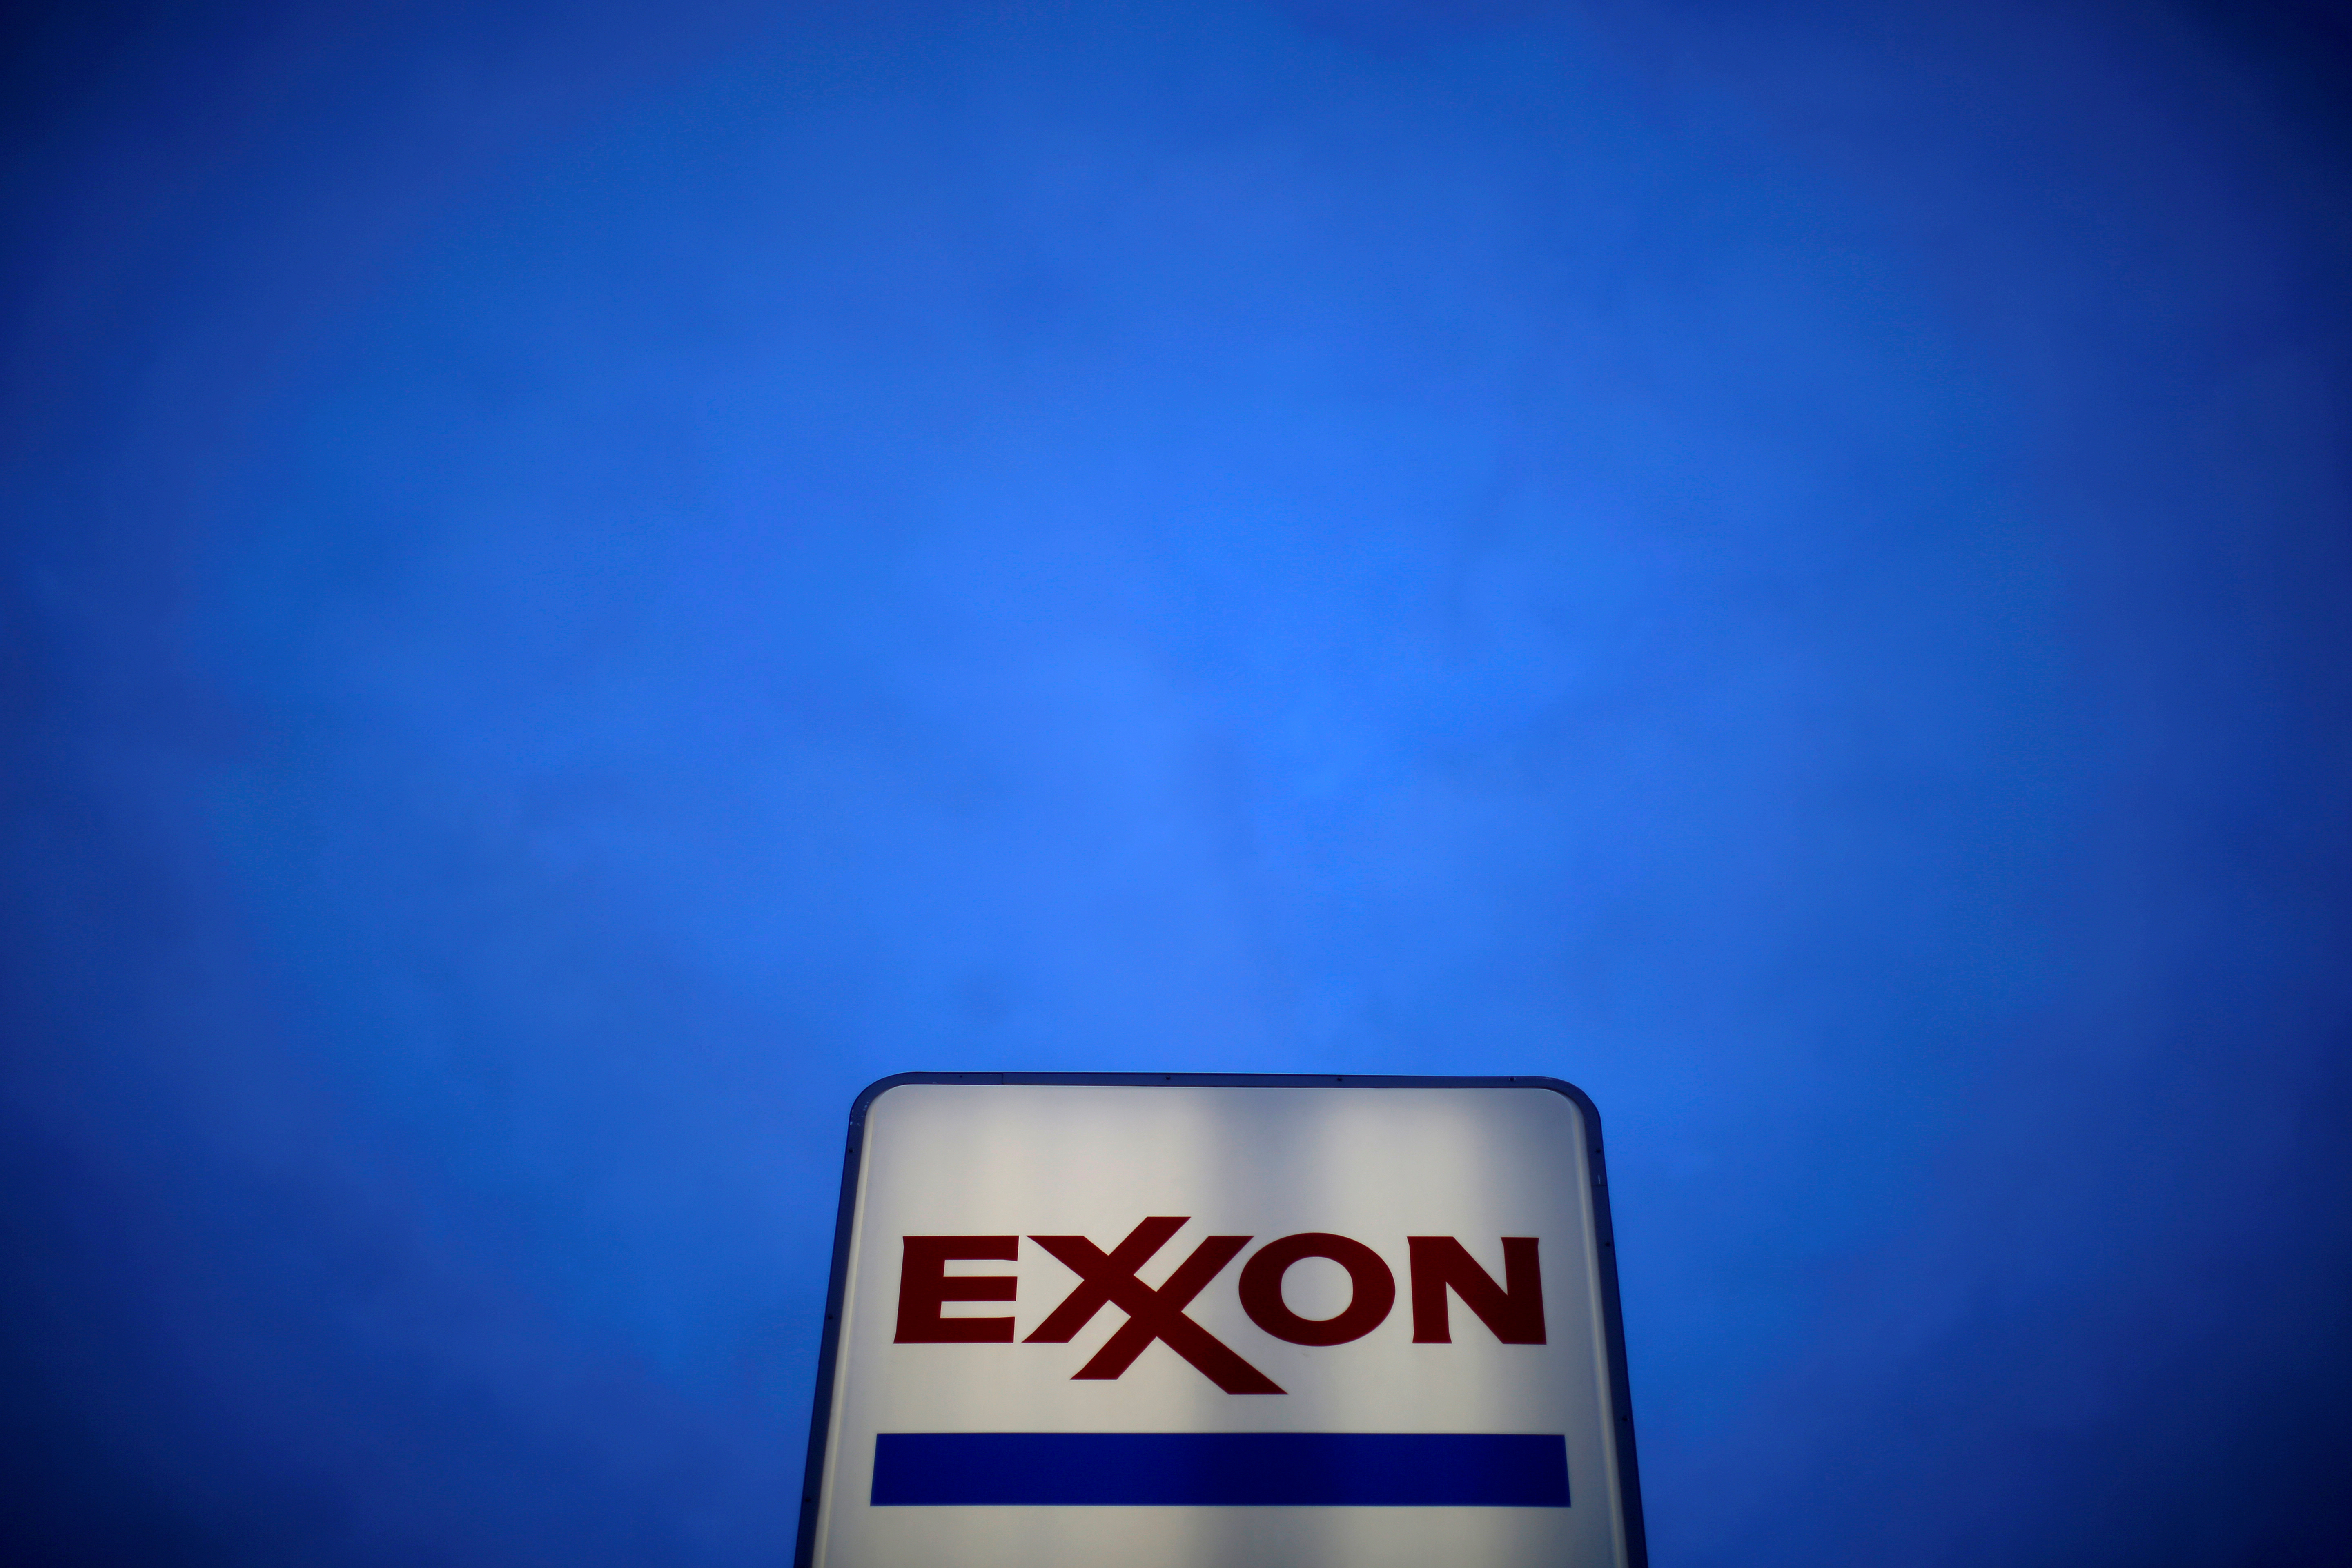 An Exxon sign is seen at a gas station in the Chicago suburb of Norridge